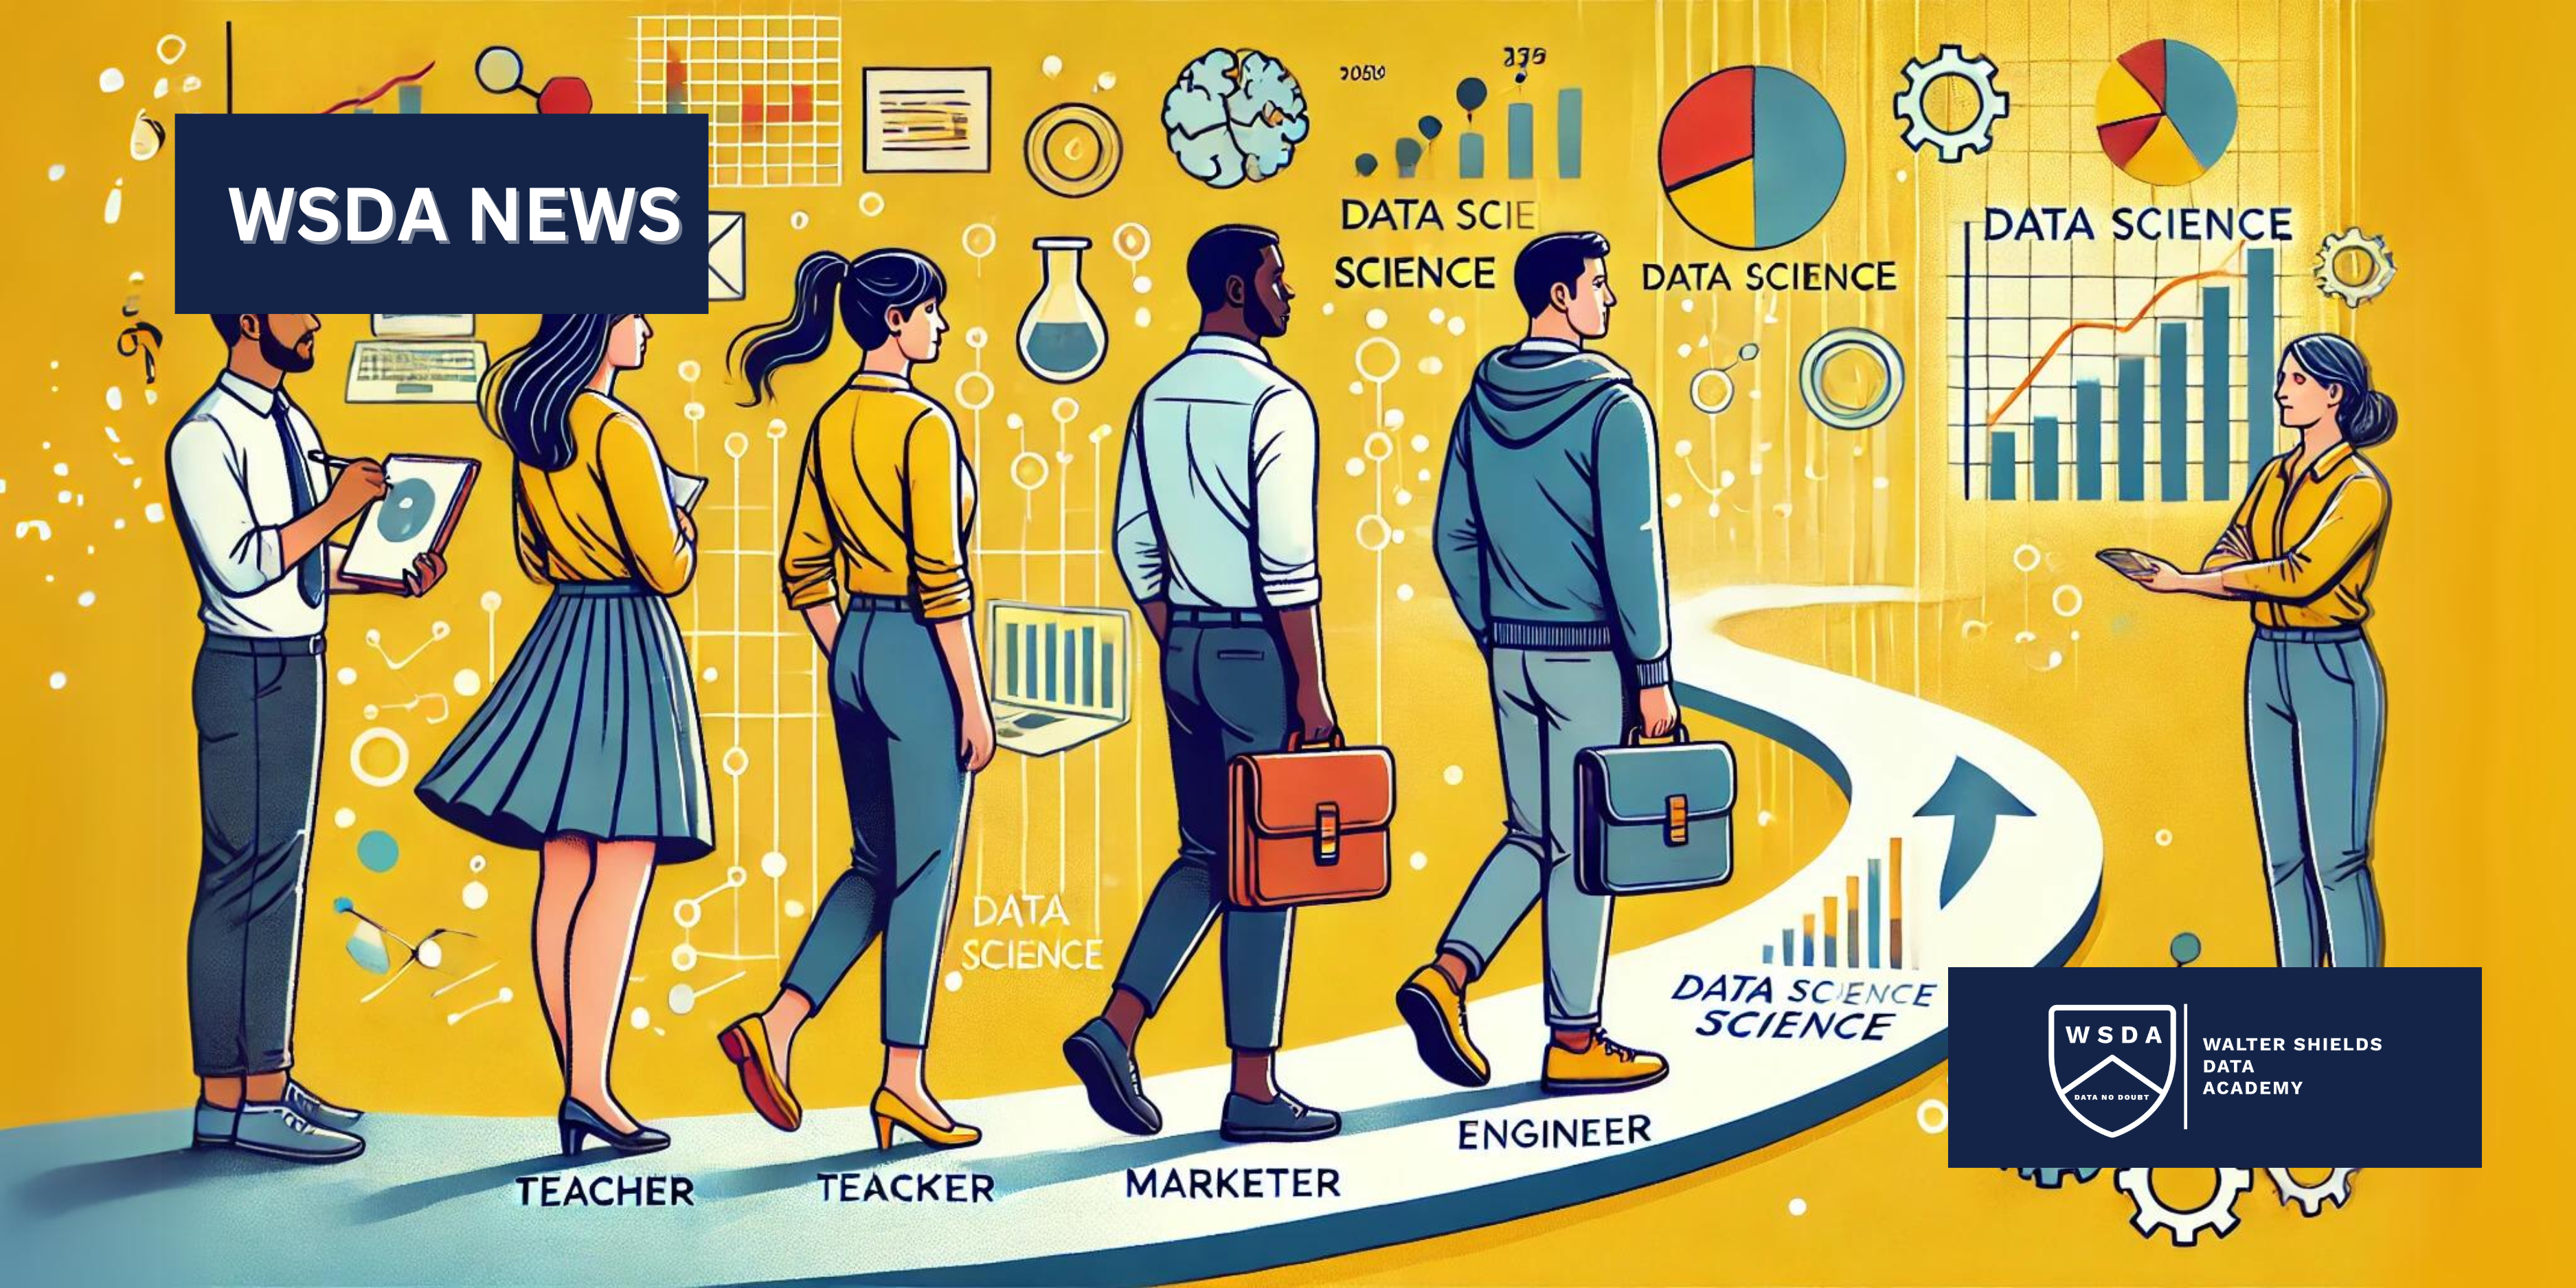 Career Transitions to Data Science: How They Changed Careers